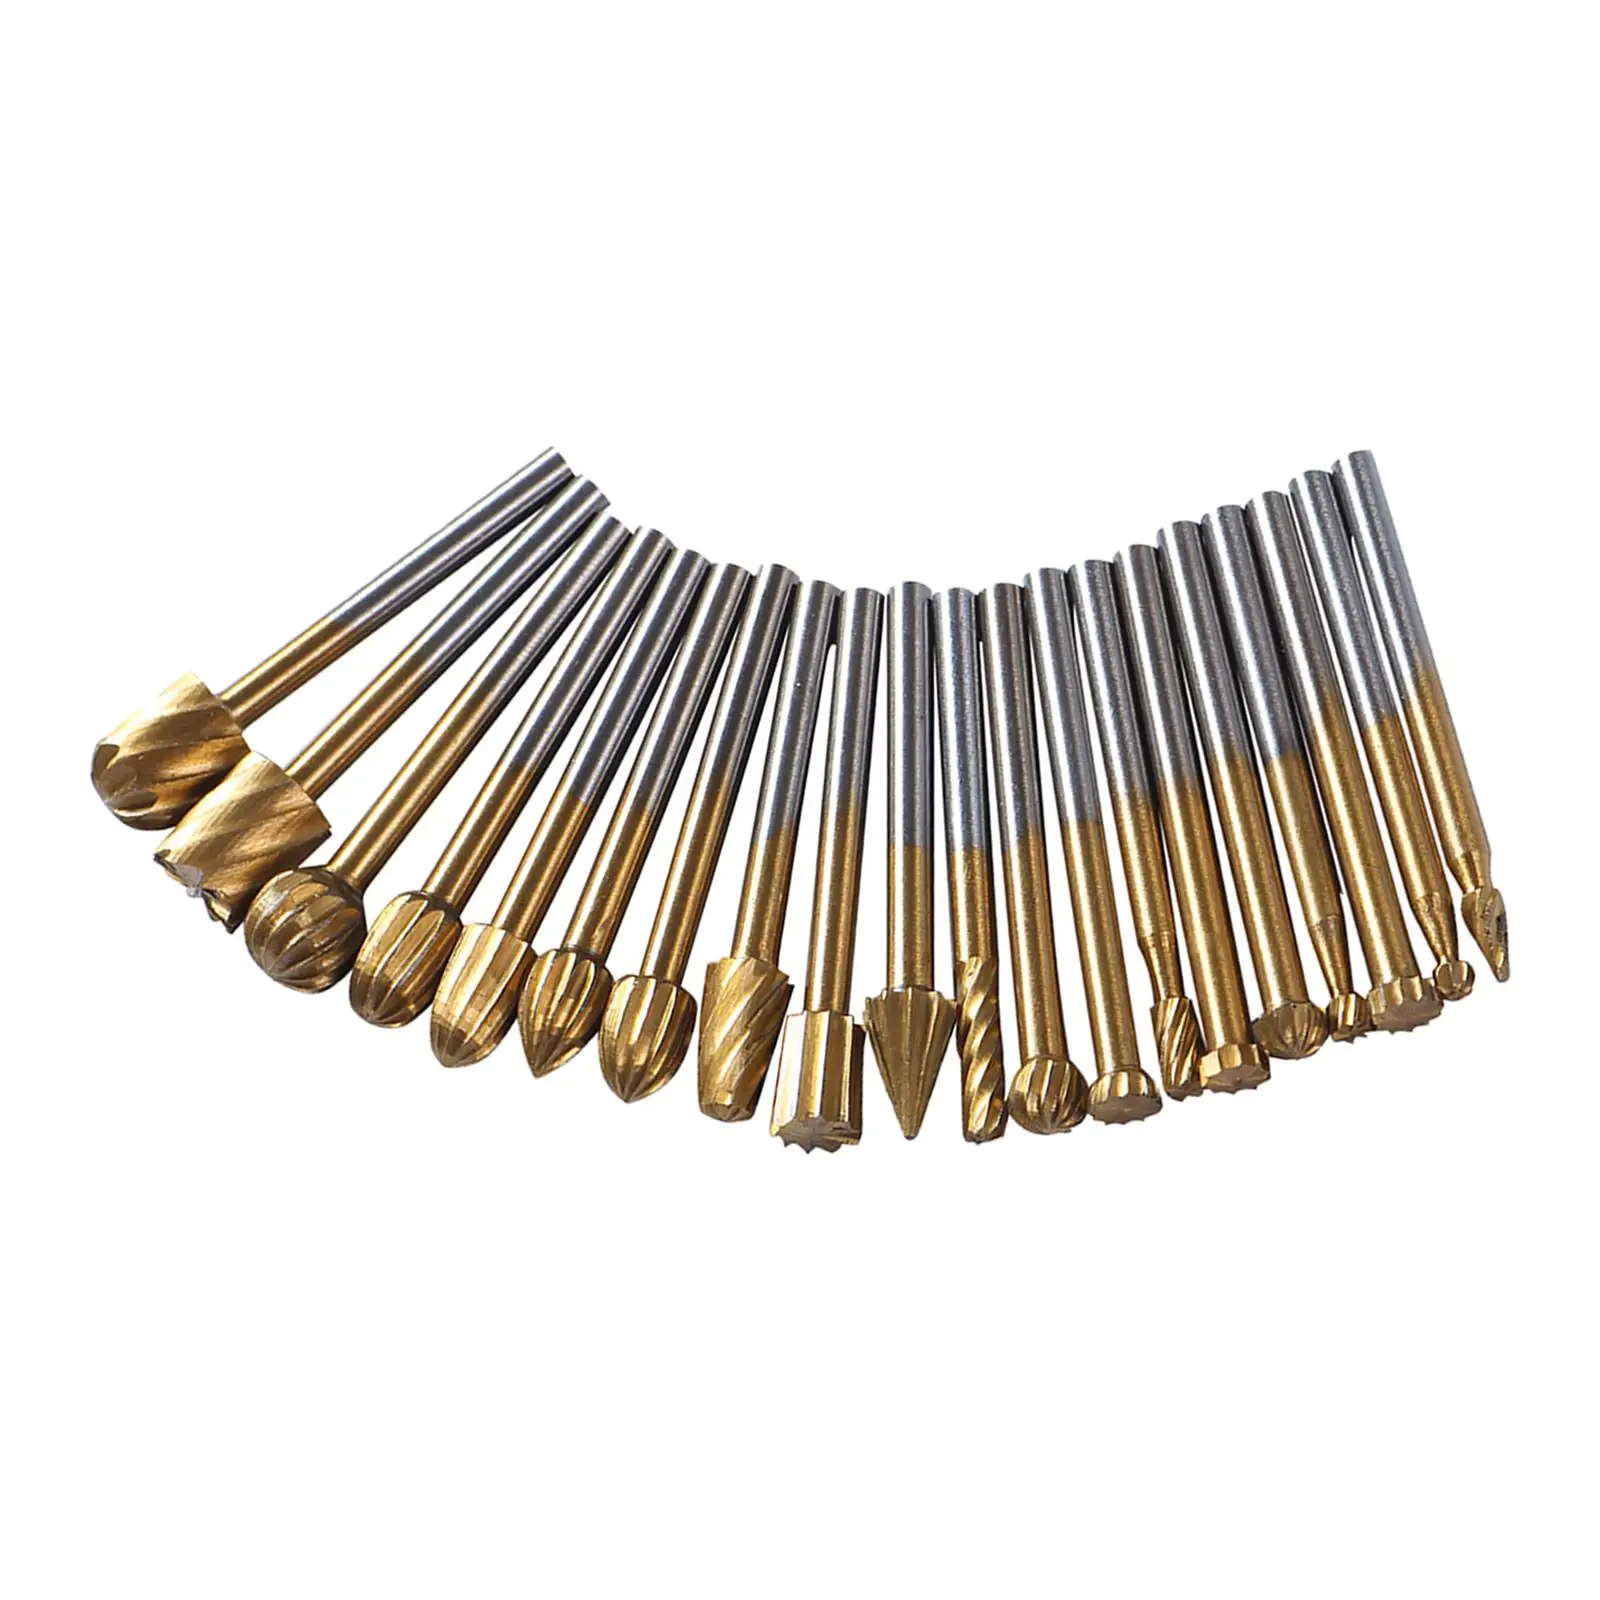 20Pcs Tungsten Steel Rotary Drill Set, 3.1mm shanks Engraving Bits Polishing Rotary Tools for Carving Drilling Jewelry Ceramics